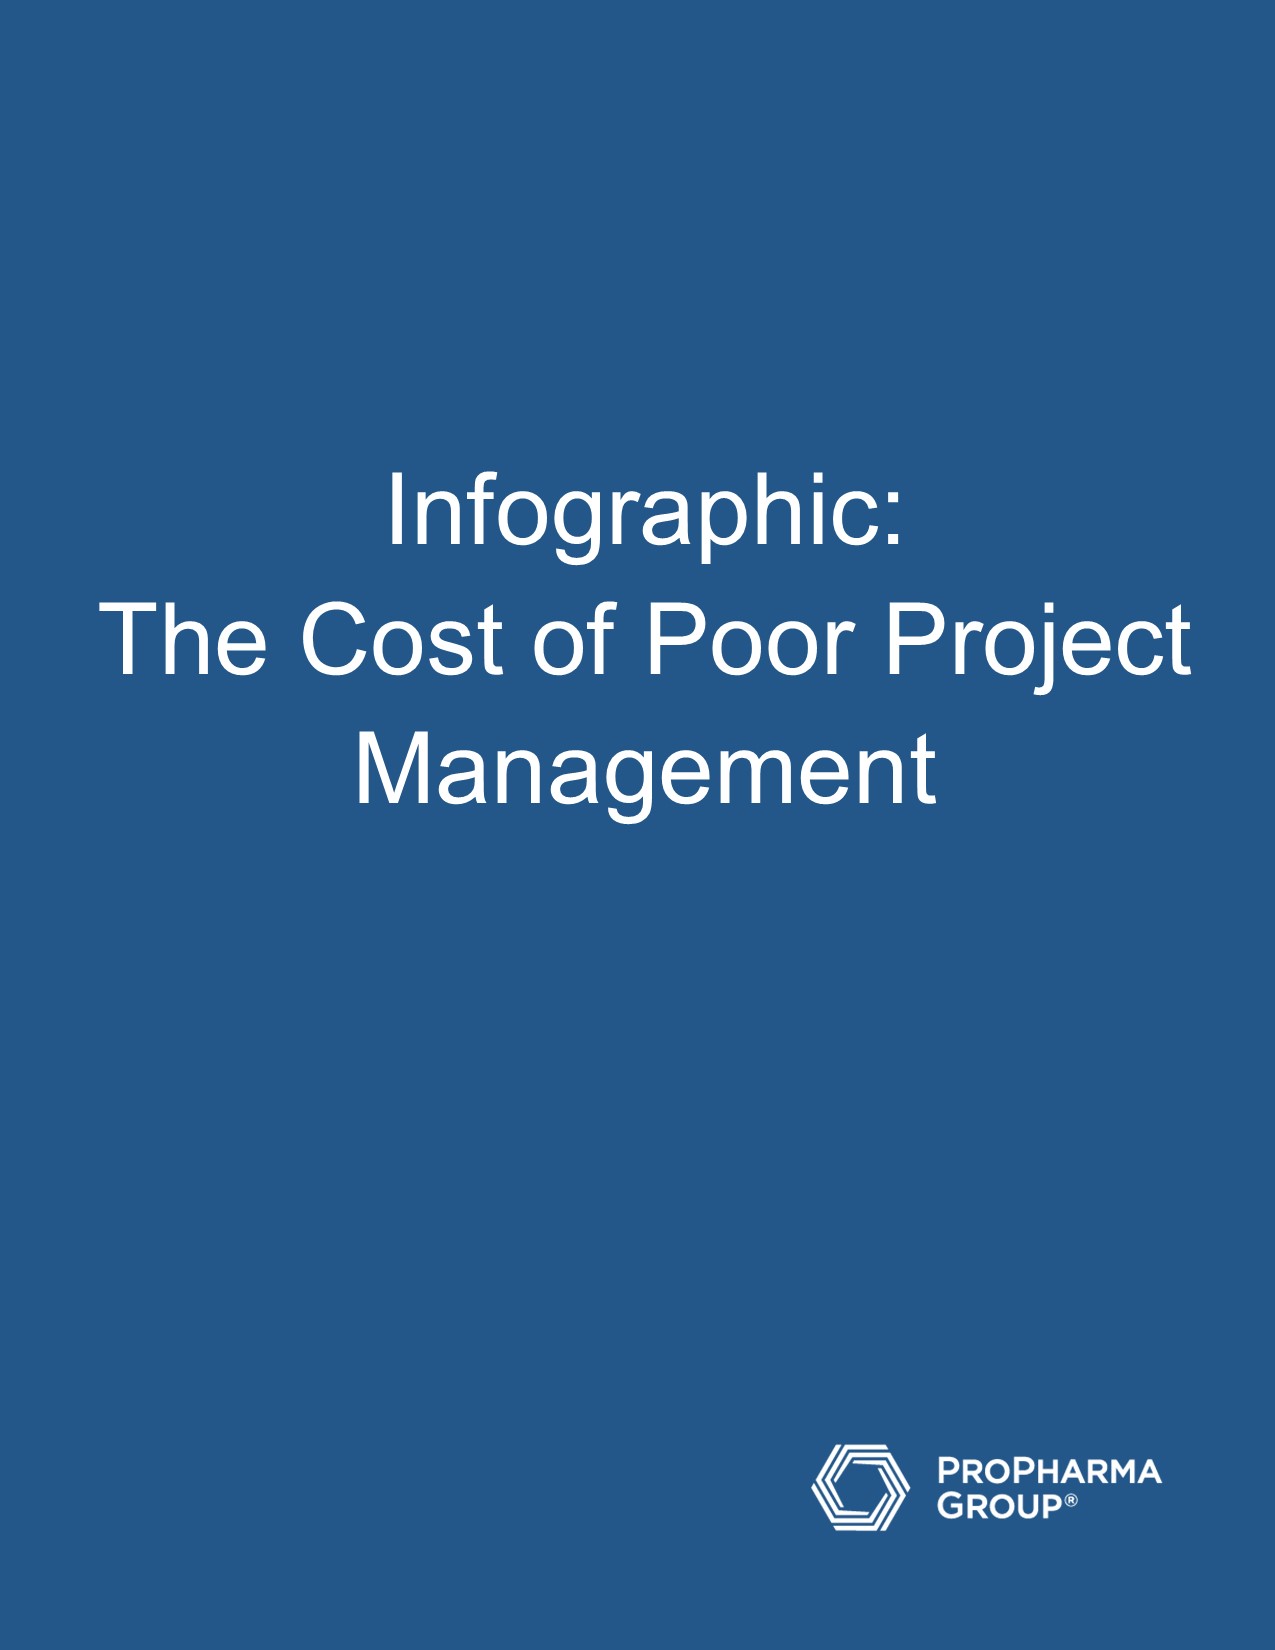 The Cost of Poor Project Management